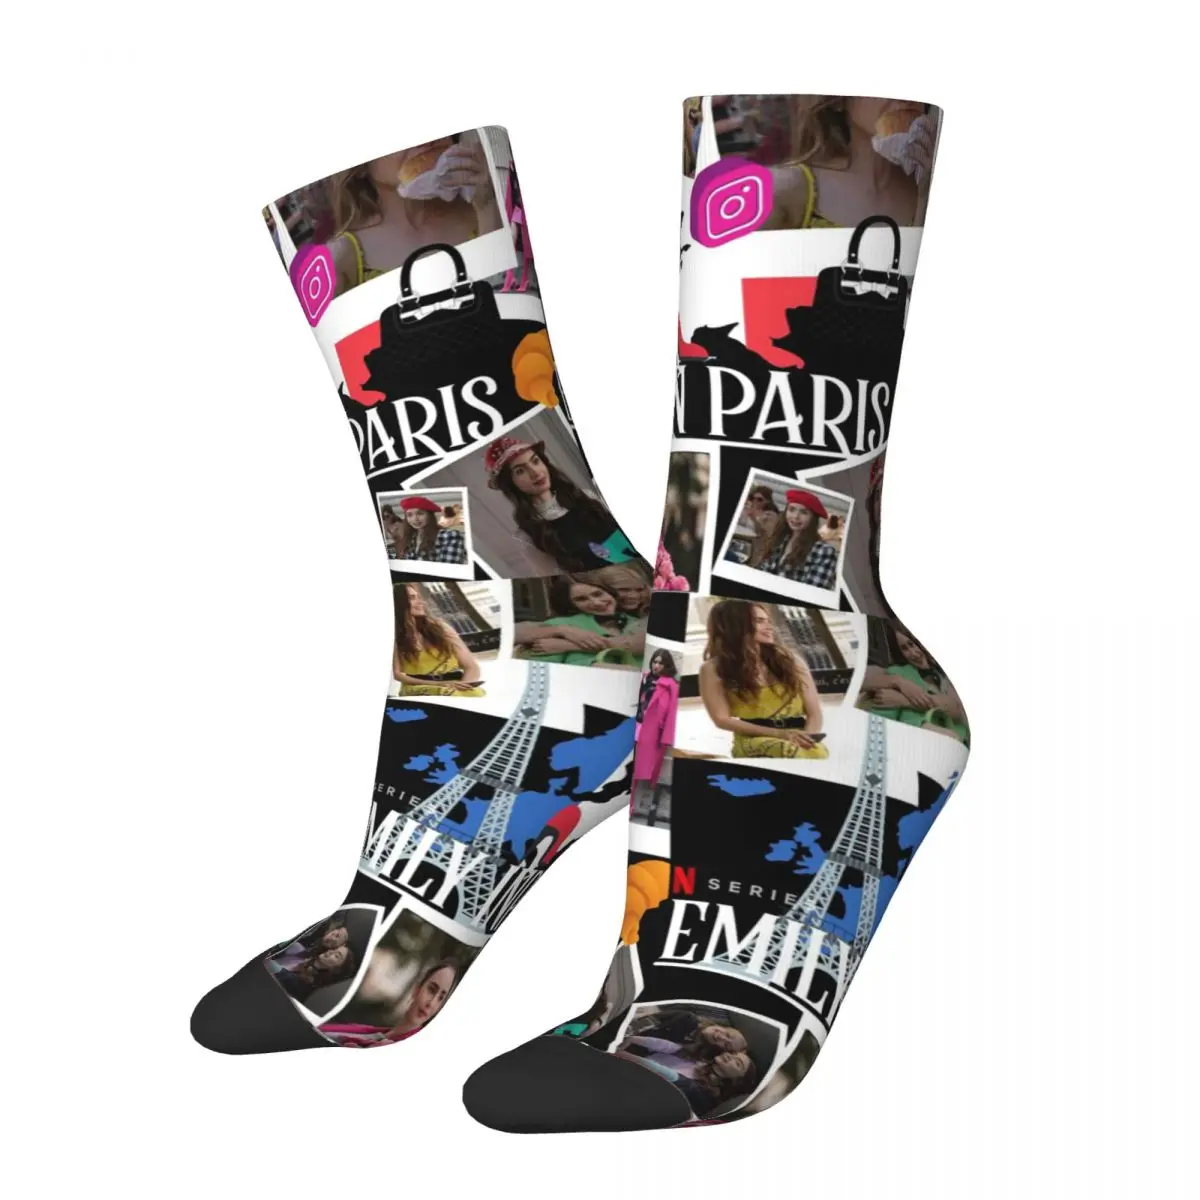 

Emily In Paris Merchandise Crew Socks Cozy High Quality Long Socks Warm for Womens Best Gifts